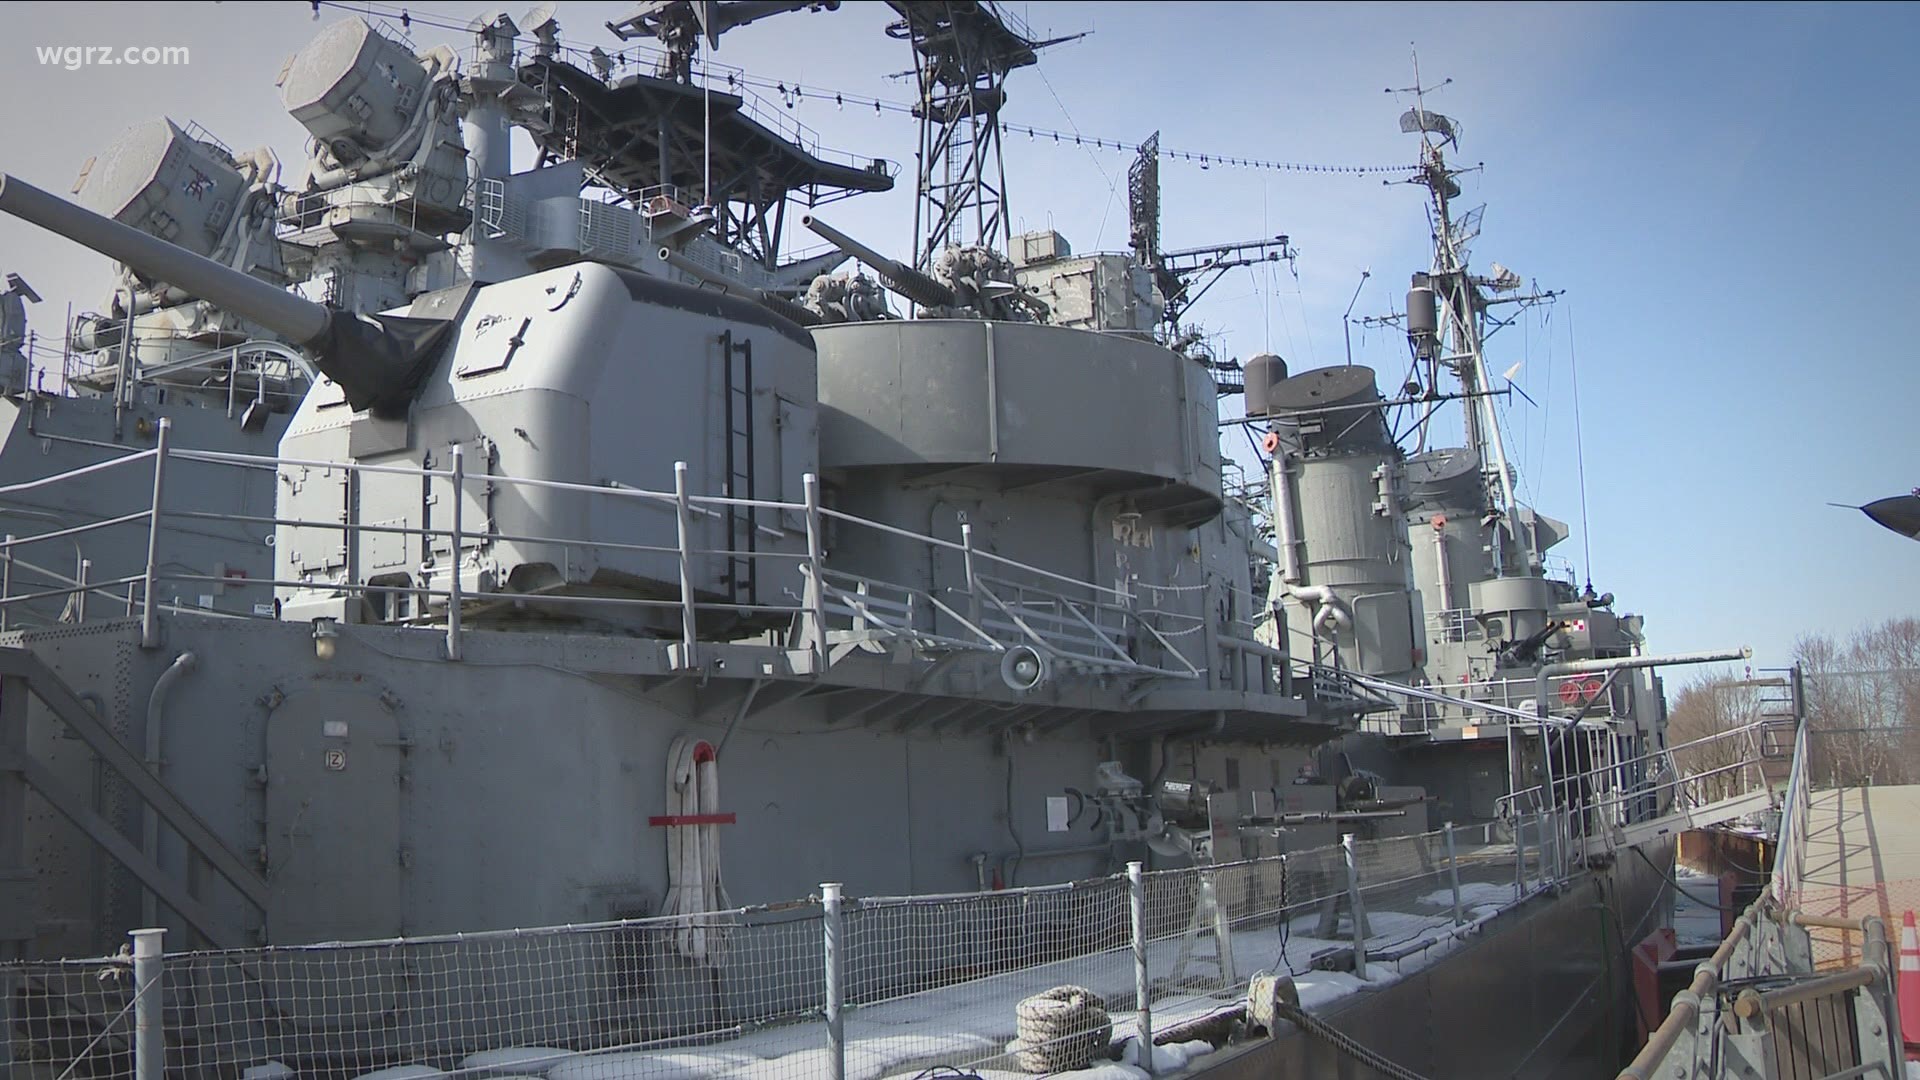 USS The Sullivans is in danger of sinking unless 100-thousand dollars is raised for emergency repairs. One big donor has already stepped forward.